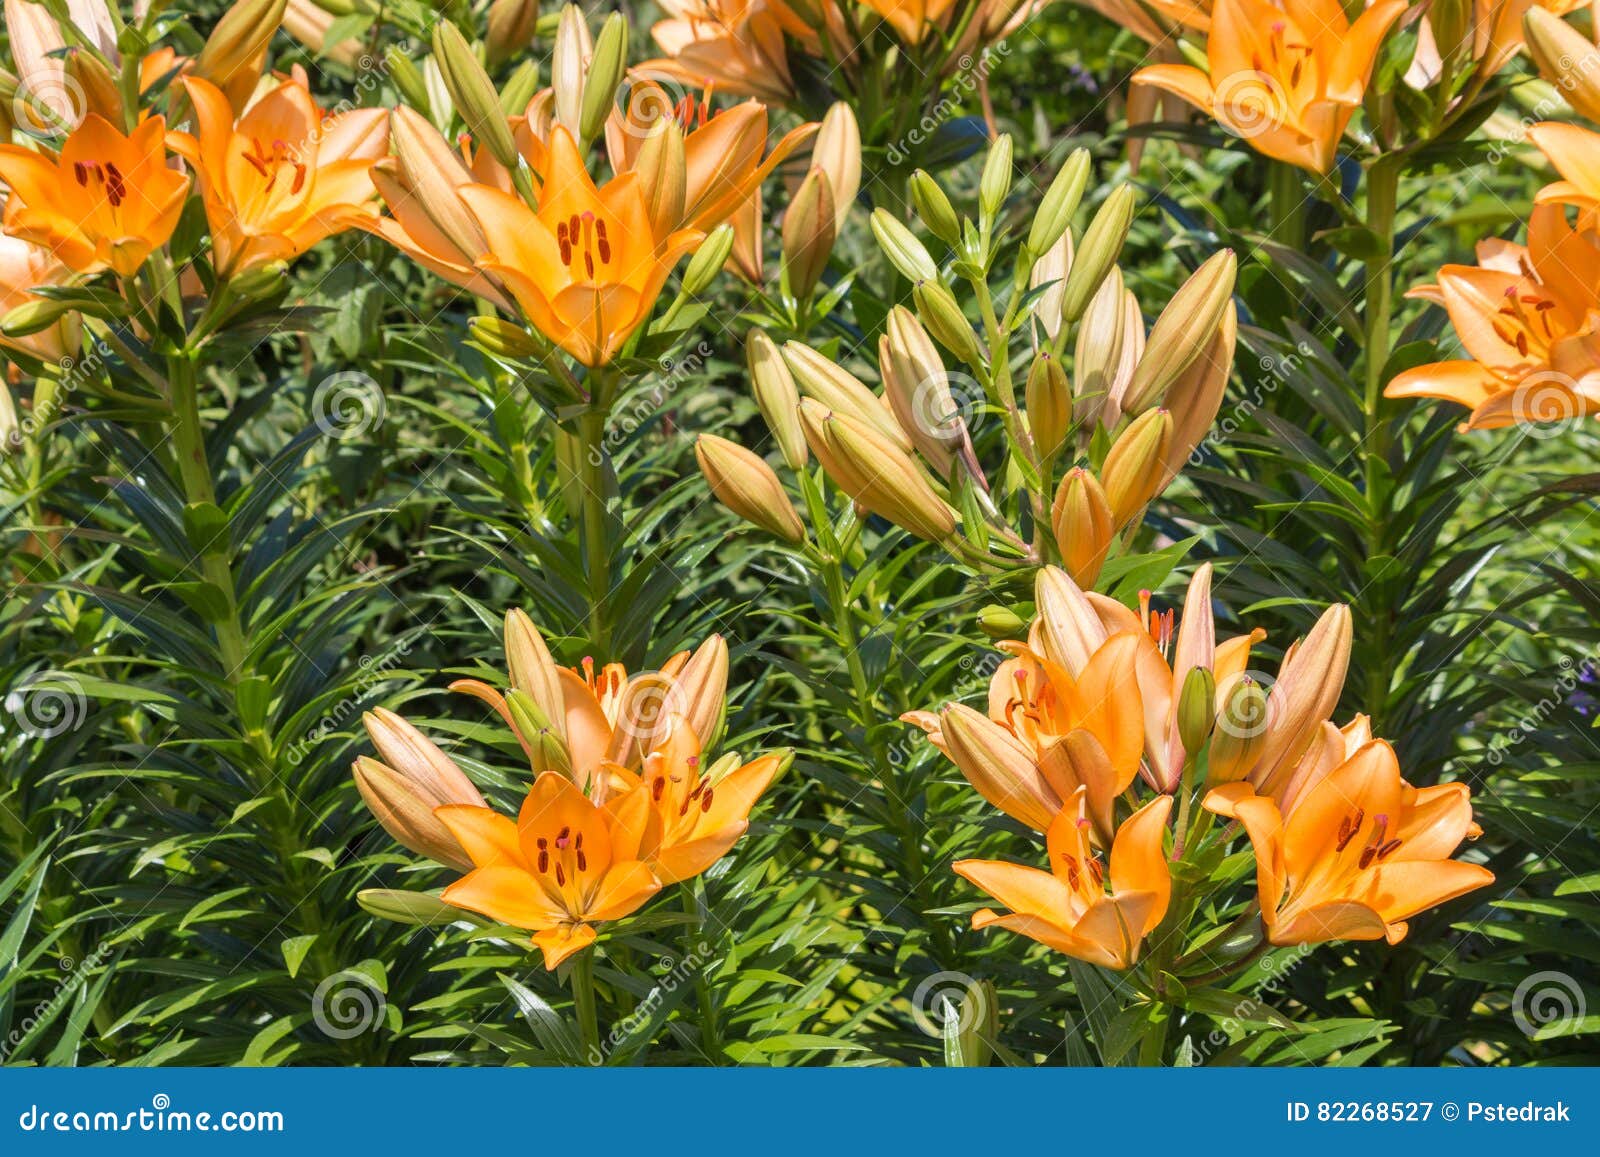 orange lily flowers in garden stock image - image of plant, flowers